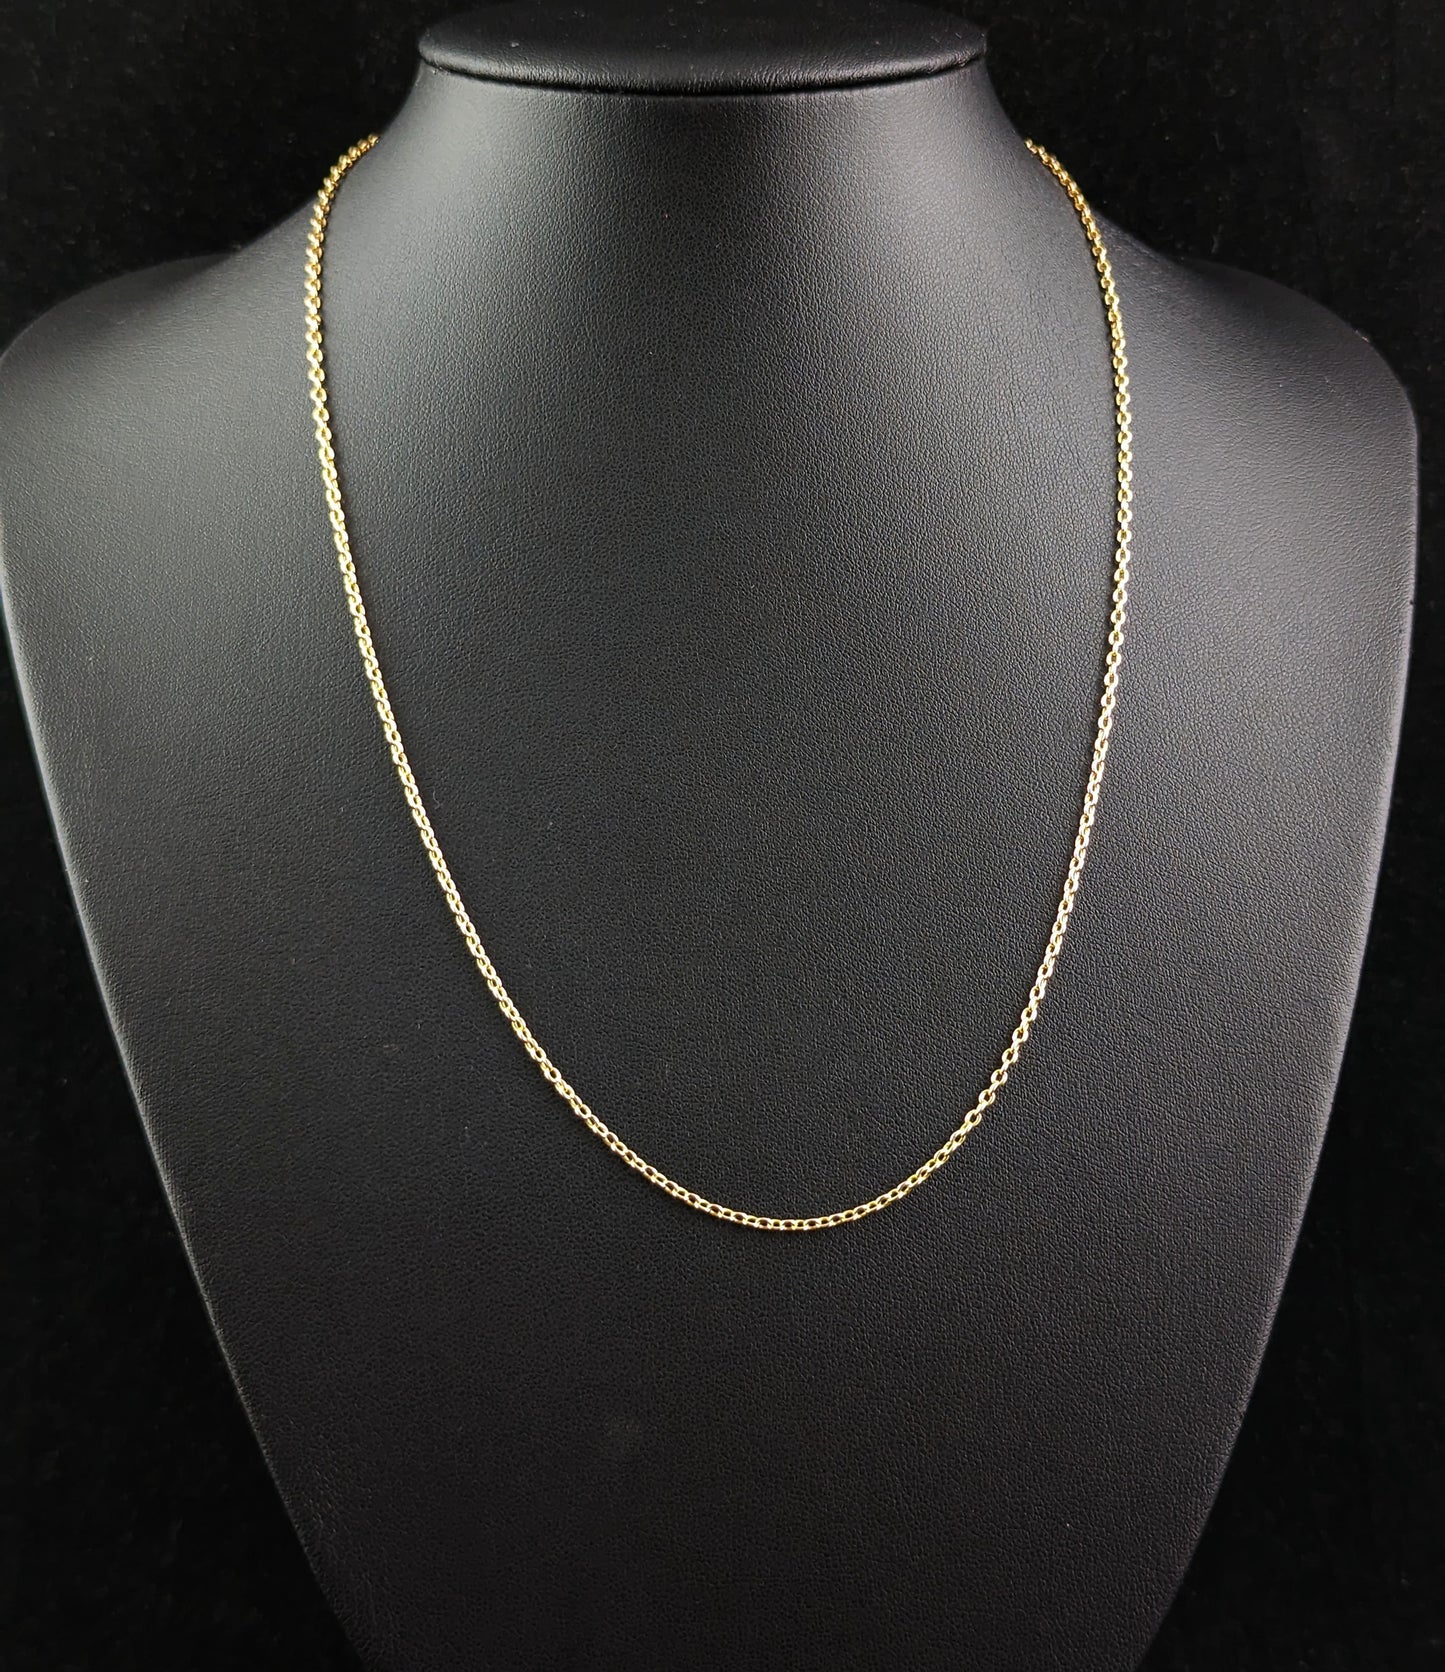 Antique 15ct yellow gold chain necklace, rolo link, Edwardian